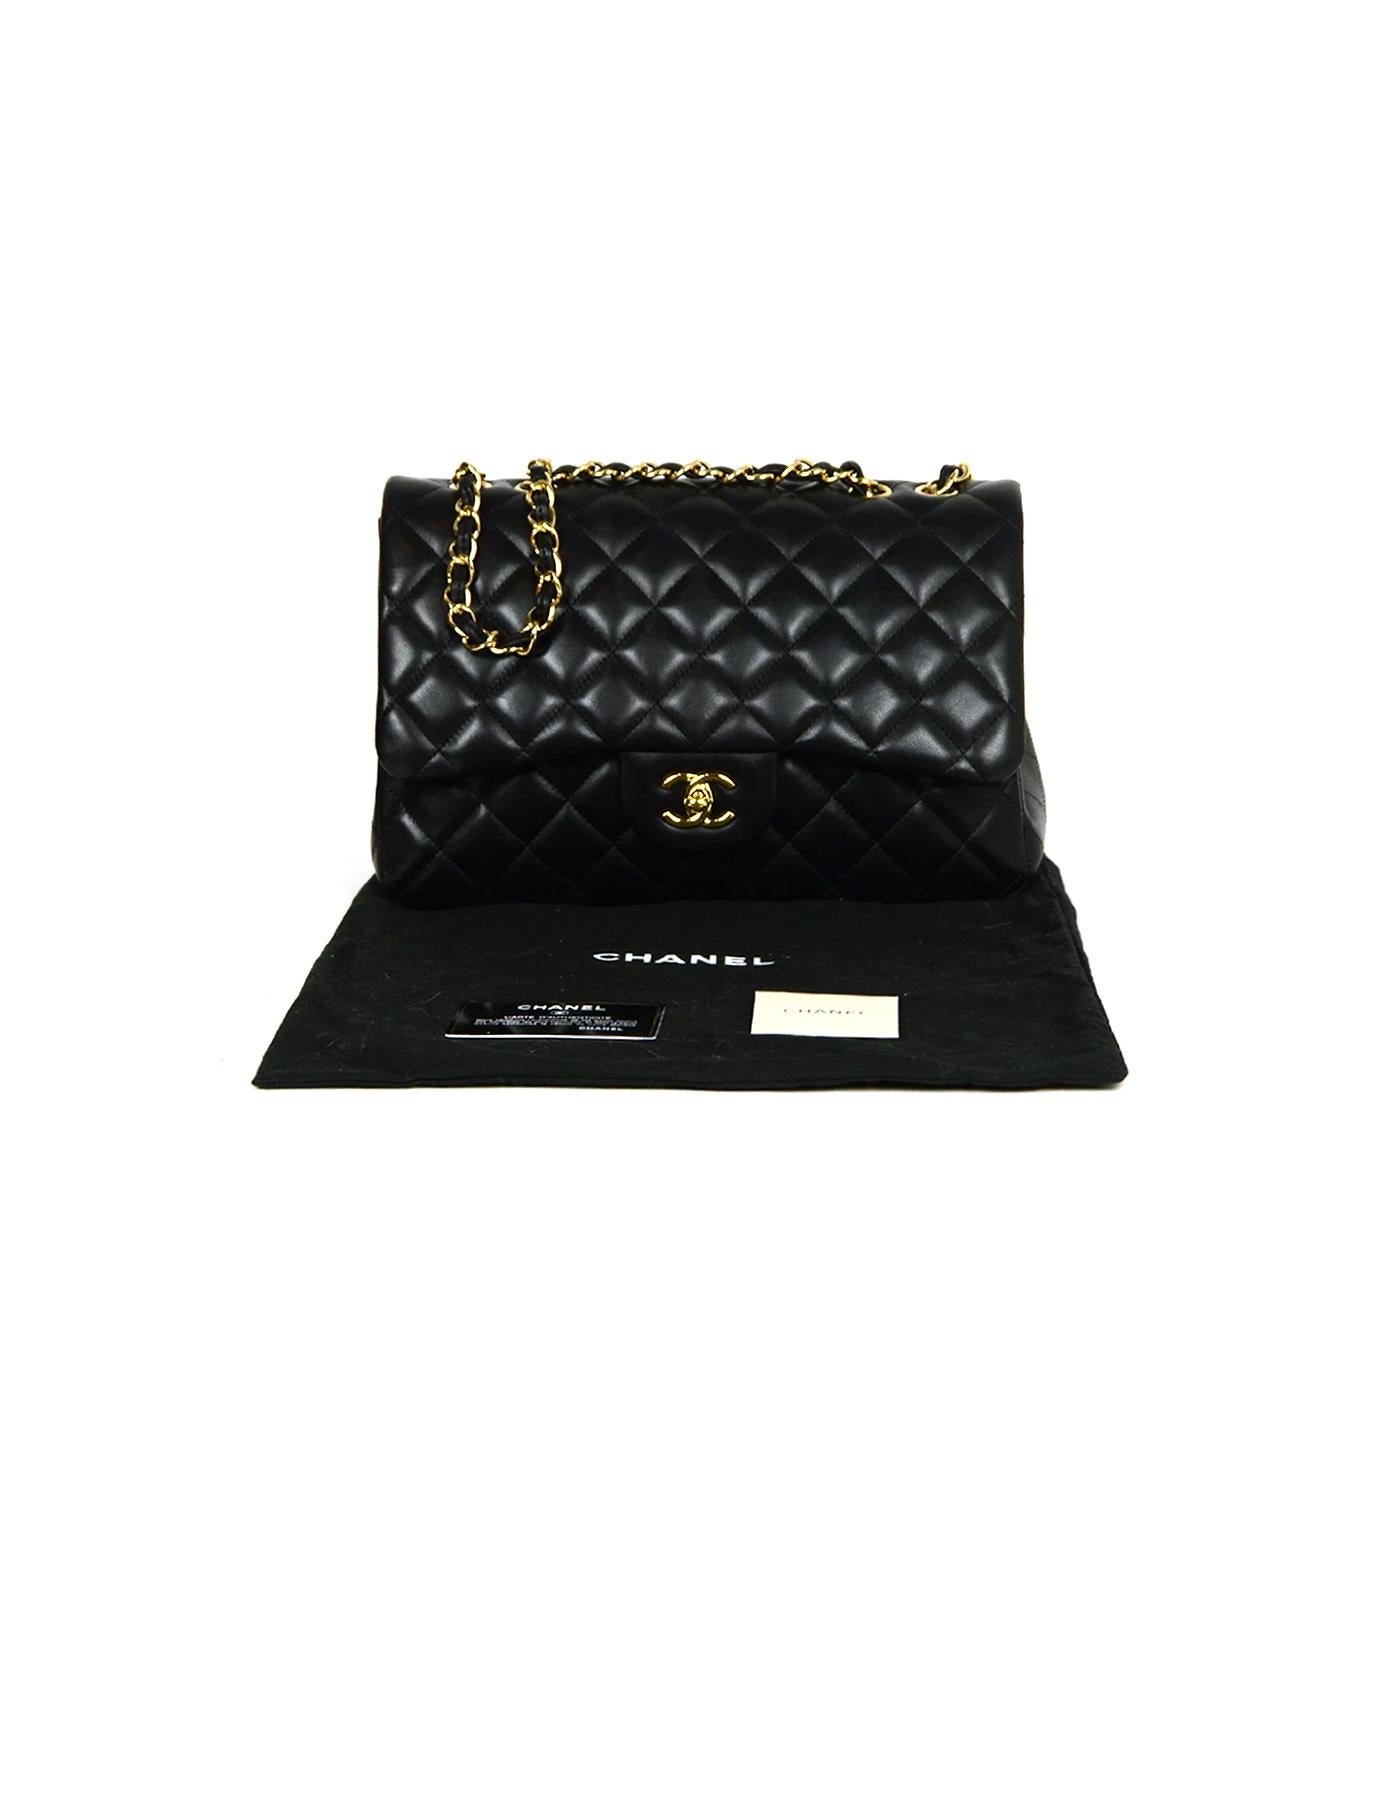 Chanel Black Lambskin Leather Quilted Single Flap Jumbo Classic Bag 7